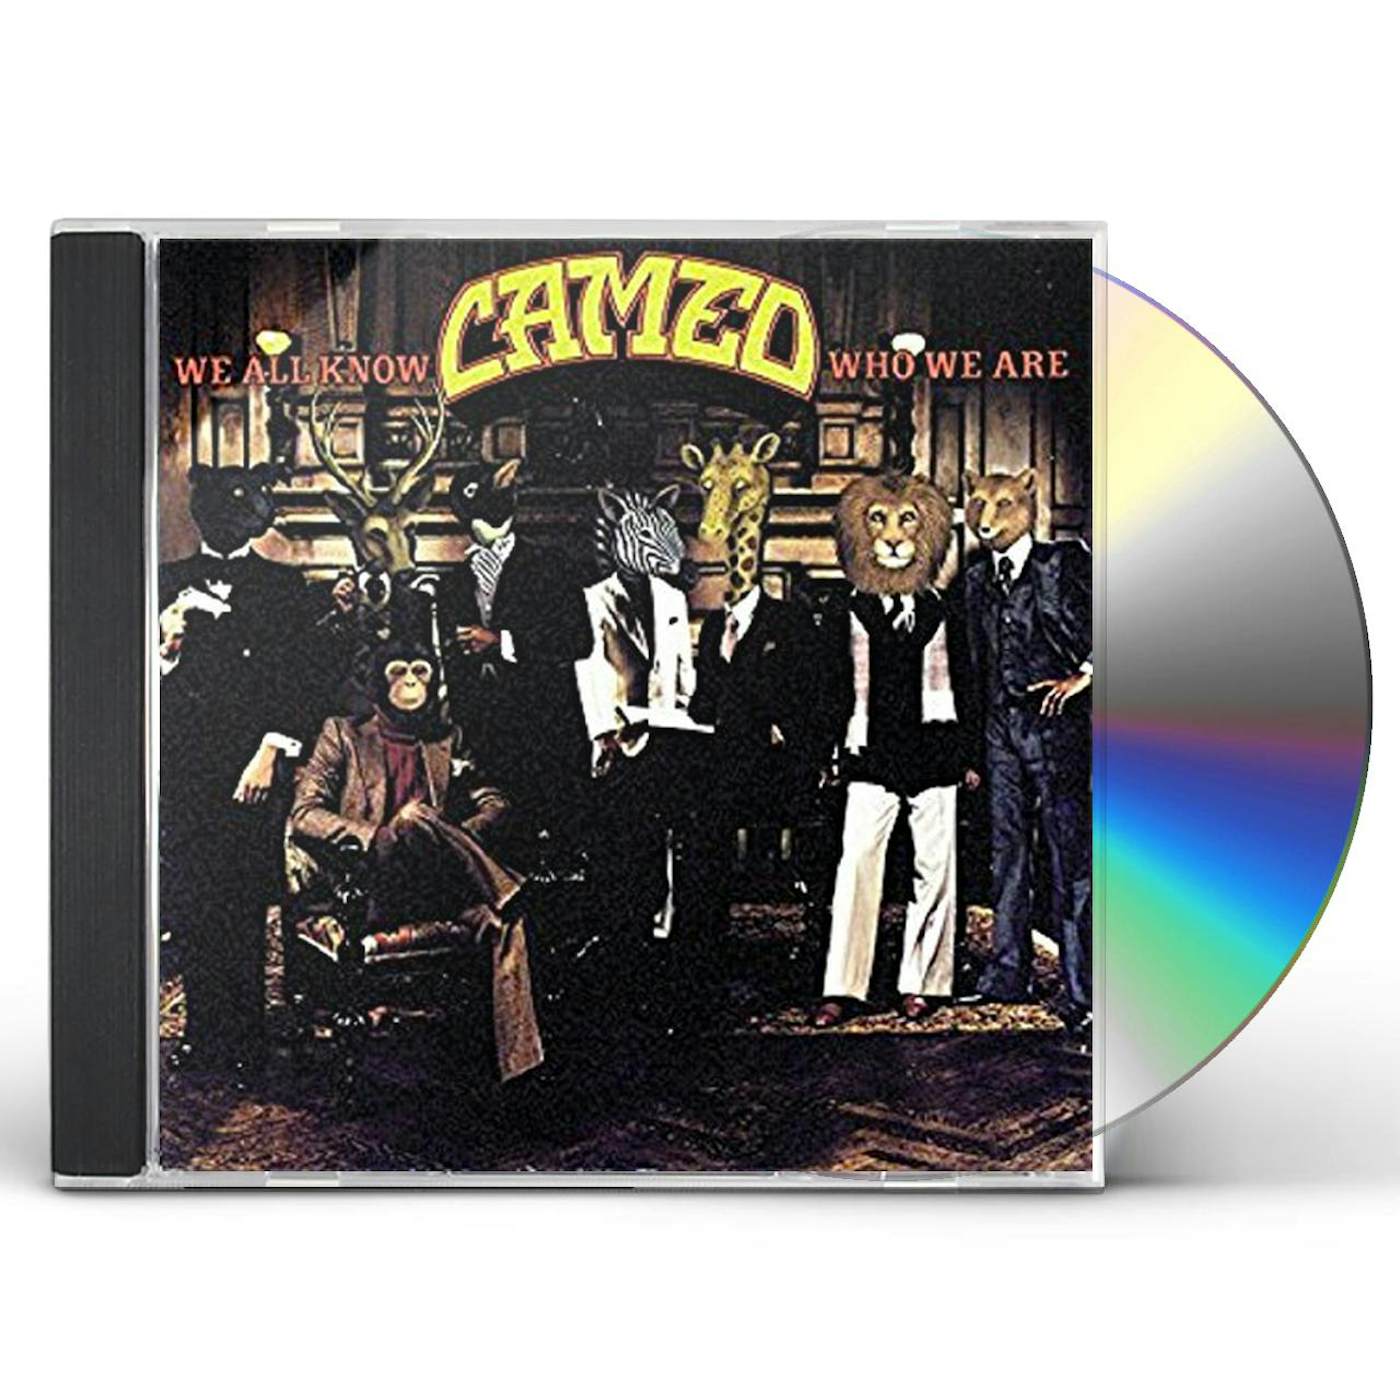 Cameo WE ALL KNOW WHO WE ARE CD